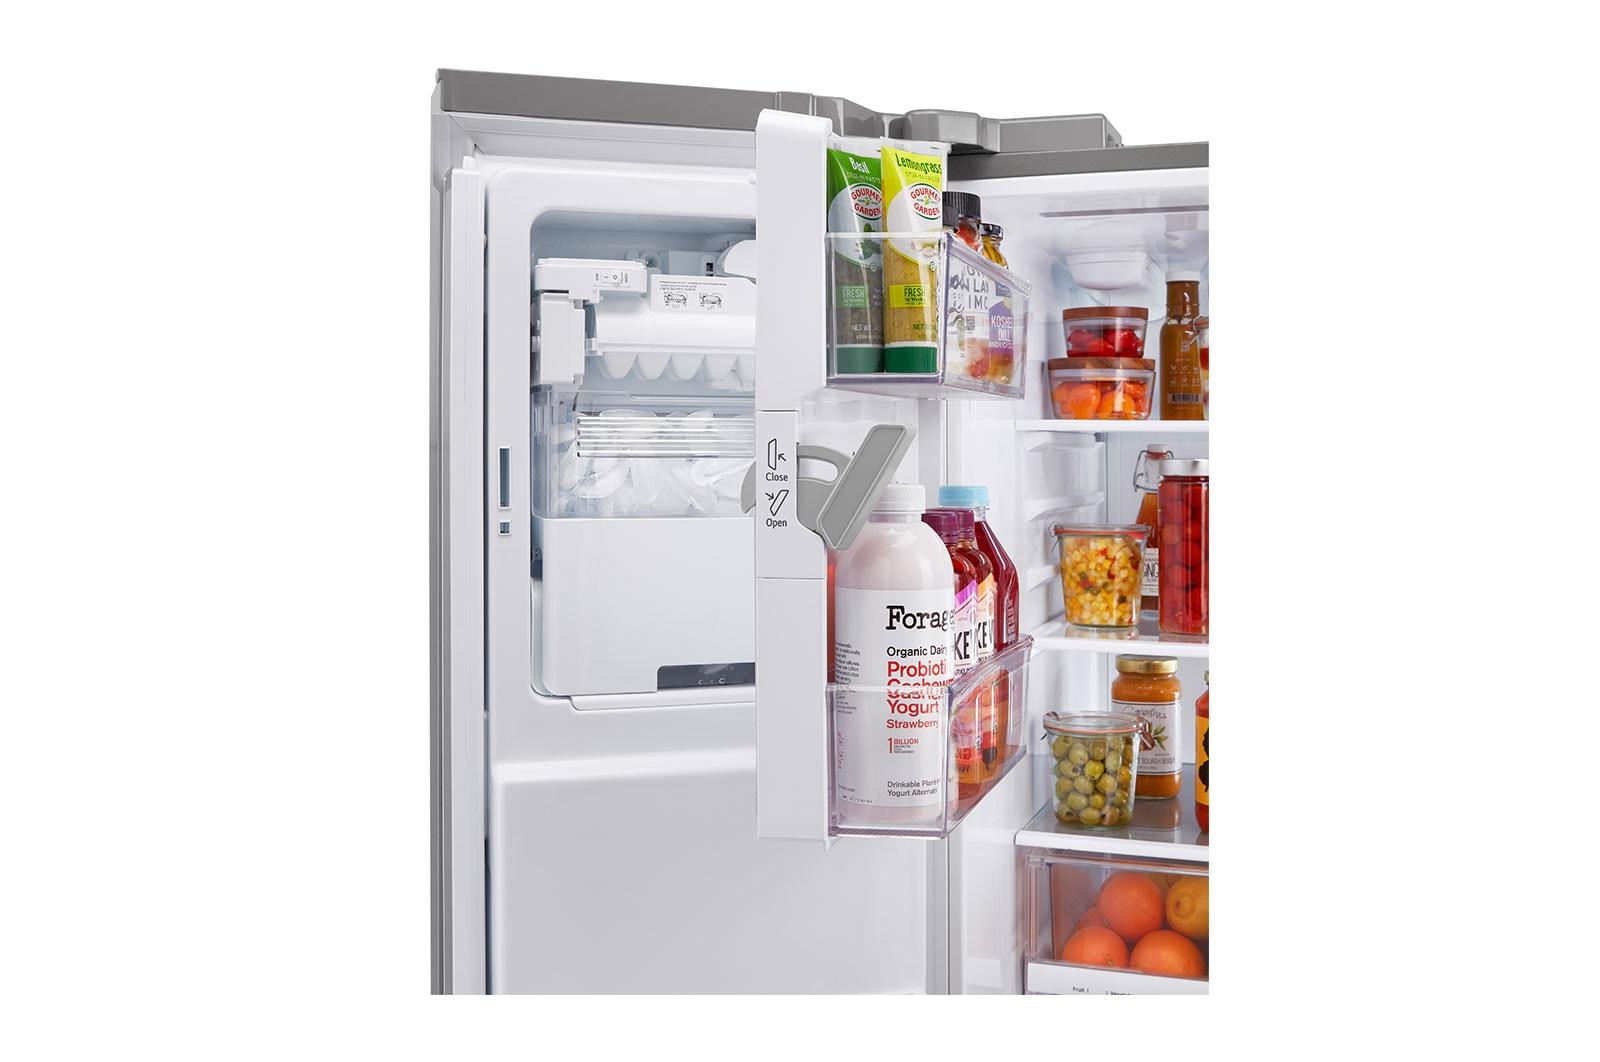 22 cu ft. Smart Counter Depth Double Freezer Refrigerator with Craft Ice™